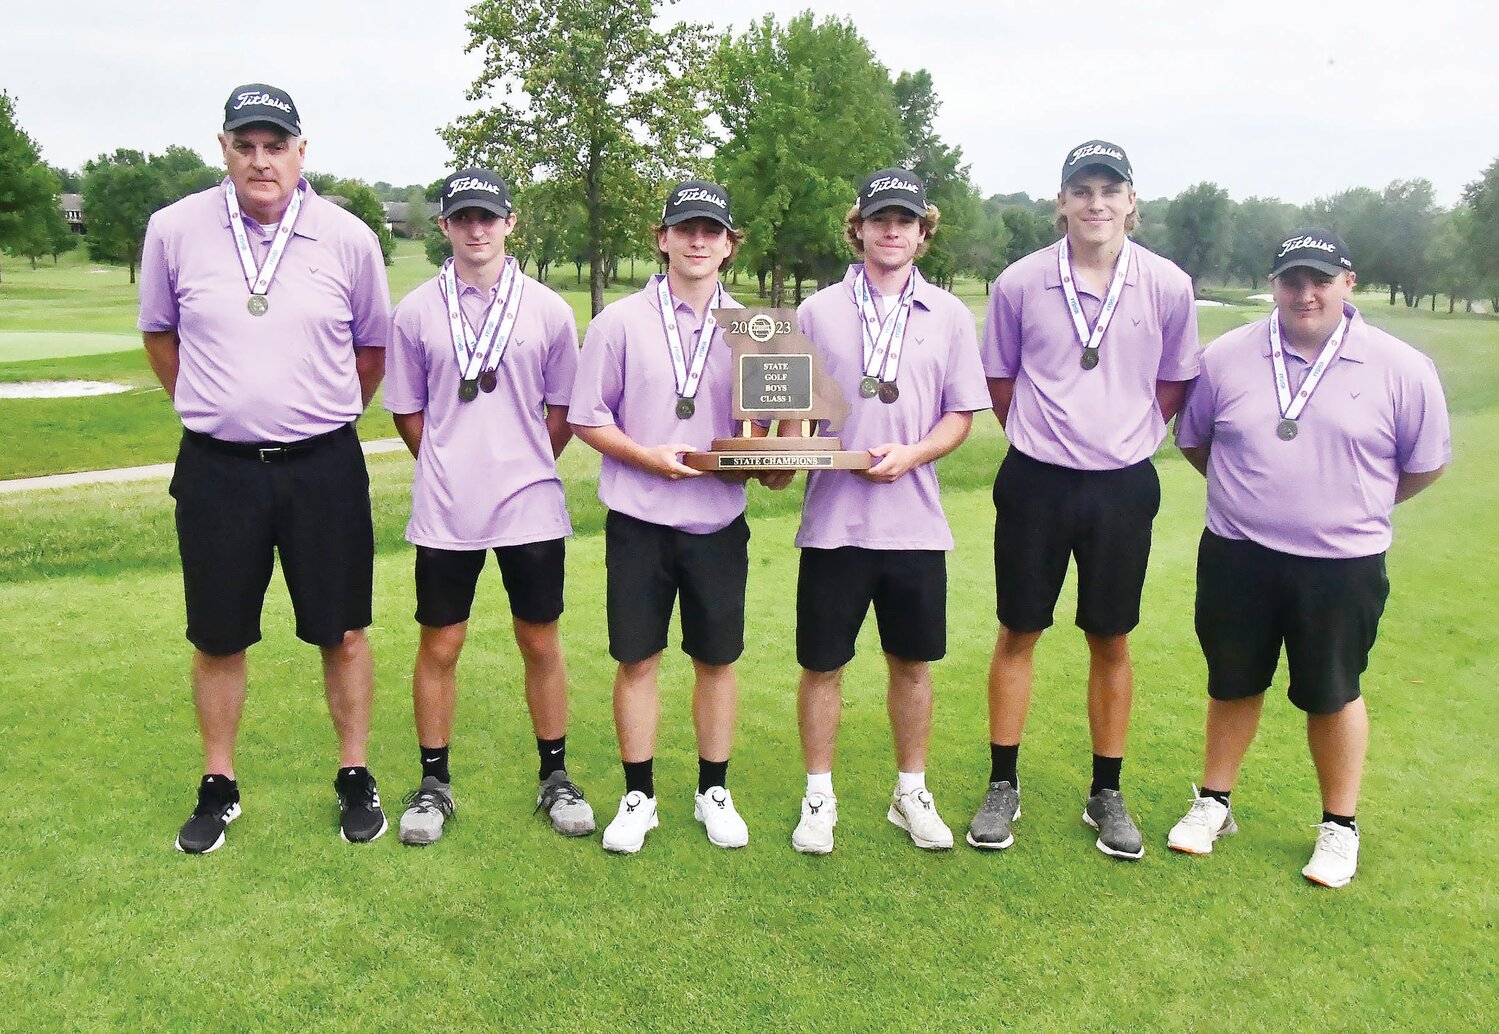 The Salisbury High School boys golf team shows off its first-place trophy, marking the second title for the school during the 2022-23 academic year. The team features head coach Kenny Wyatt plus players Nolan Gordon, Elliot Carter, Jaxon Green, Tyson Parker and Jace Carter.